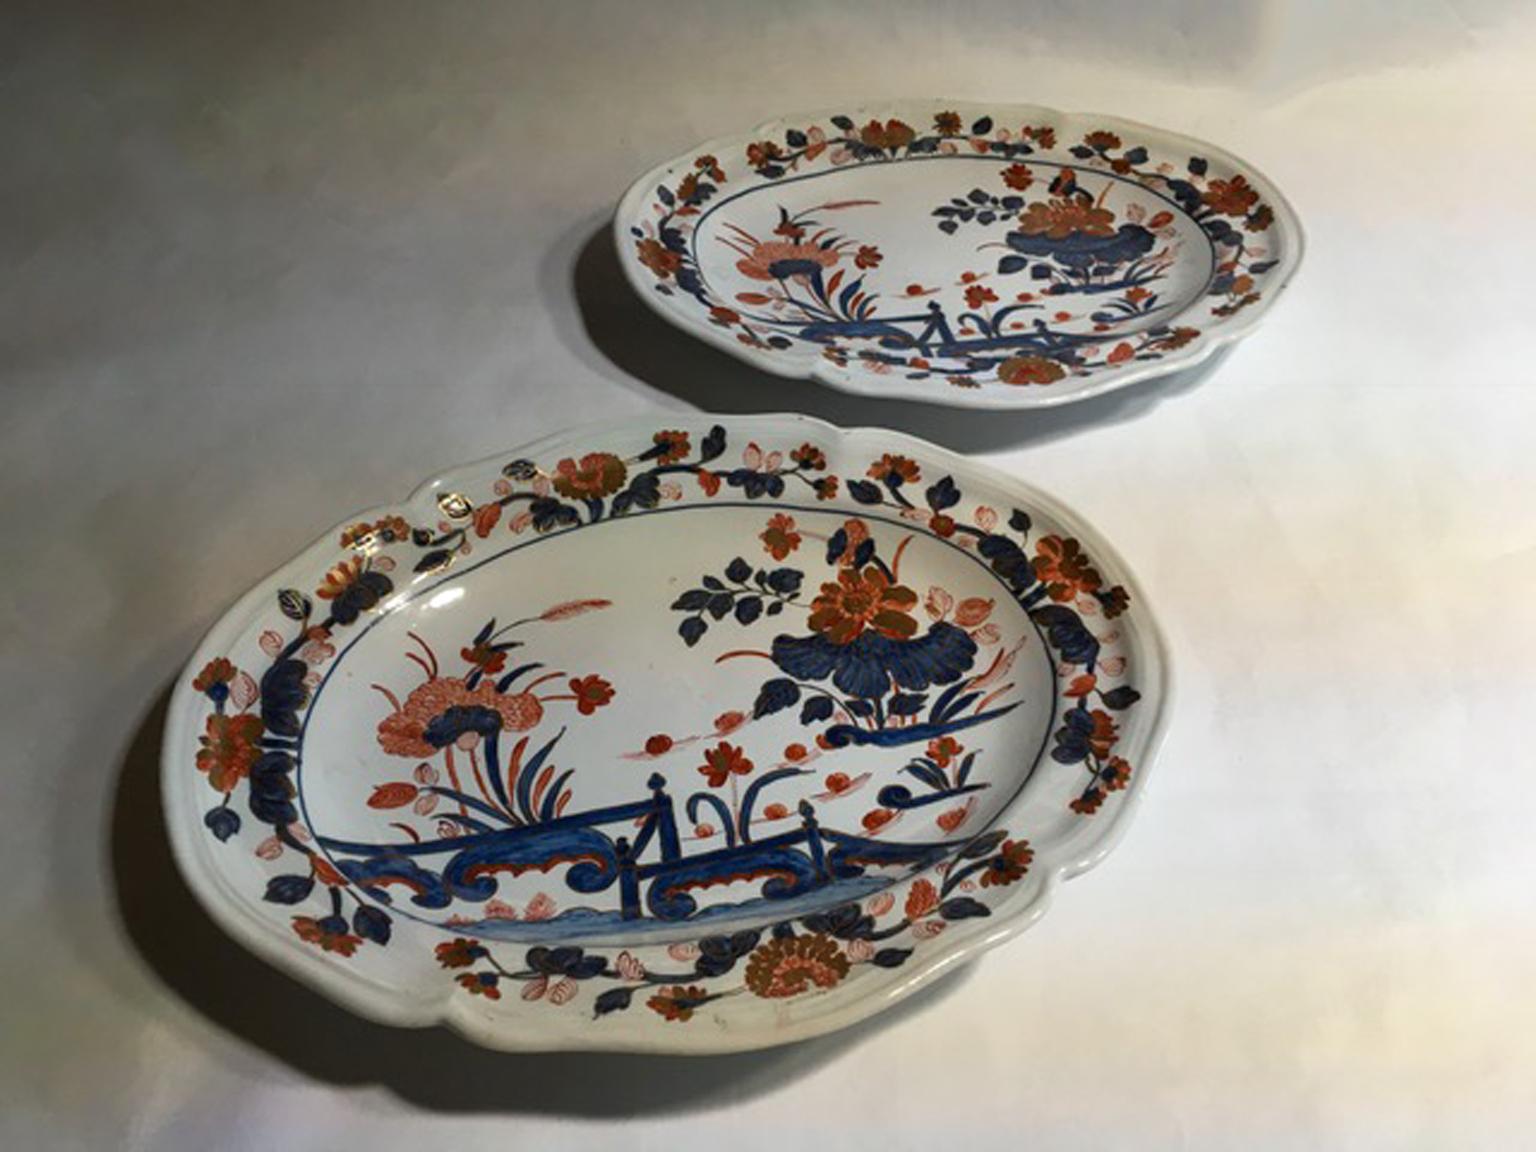 Italy Richard Ginori Mid-18th Century Pair of Porcelain Trays or Serving Dishes 9